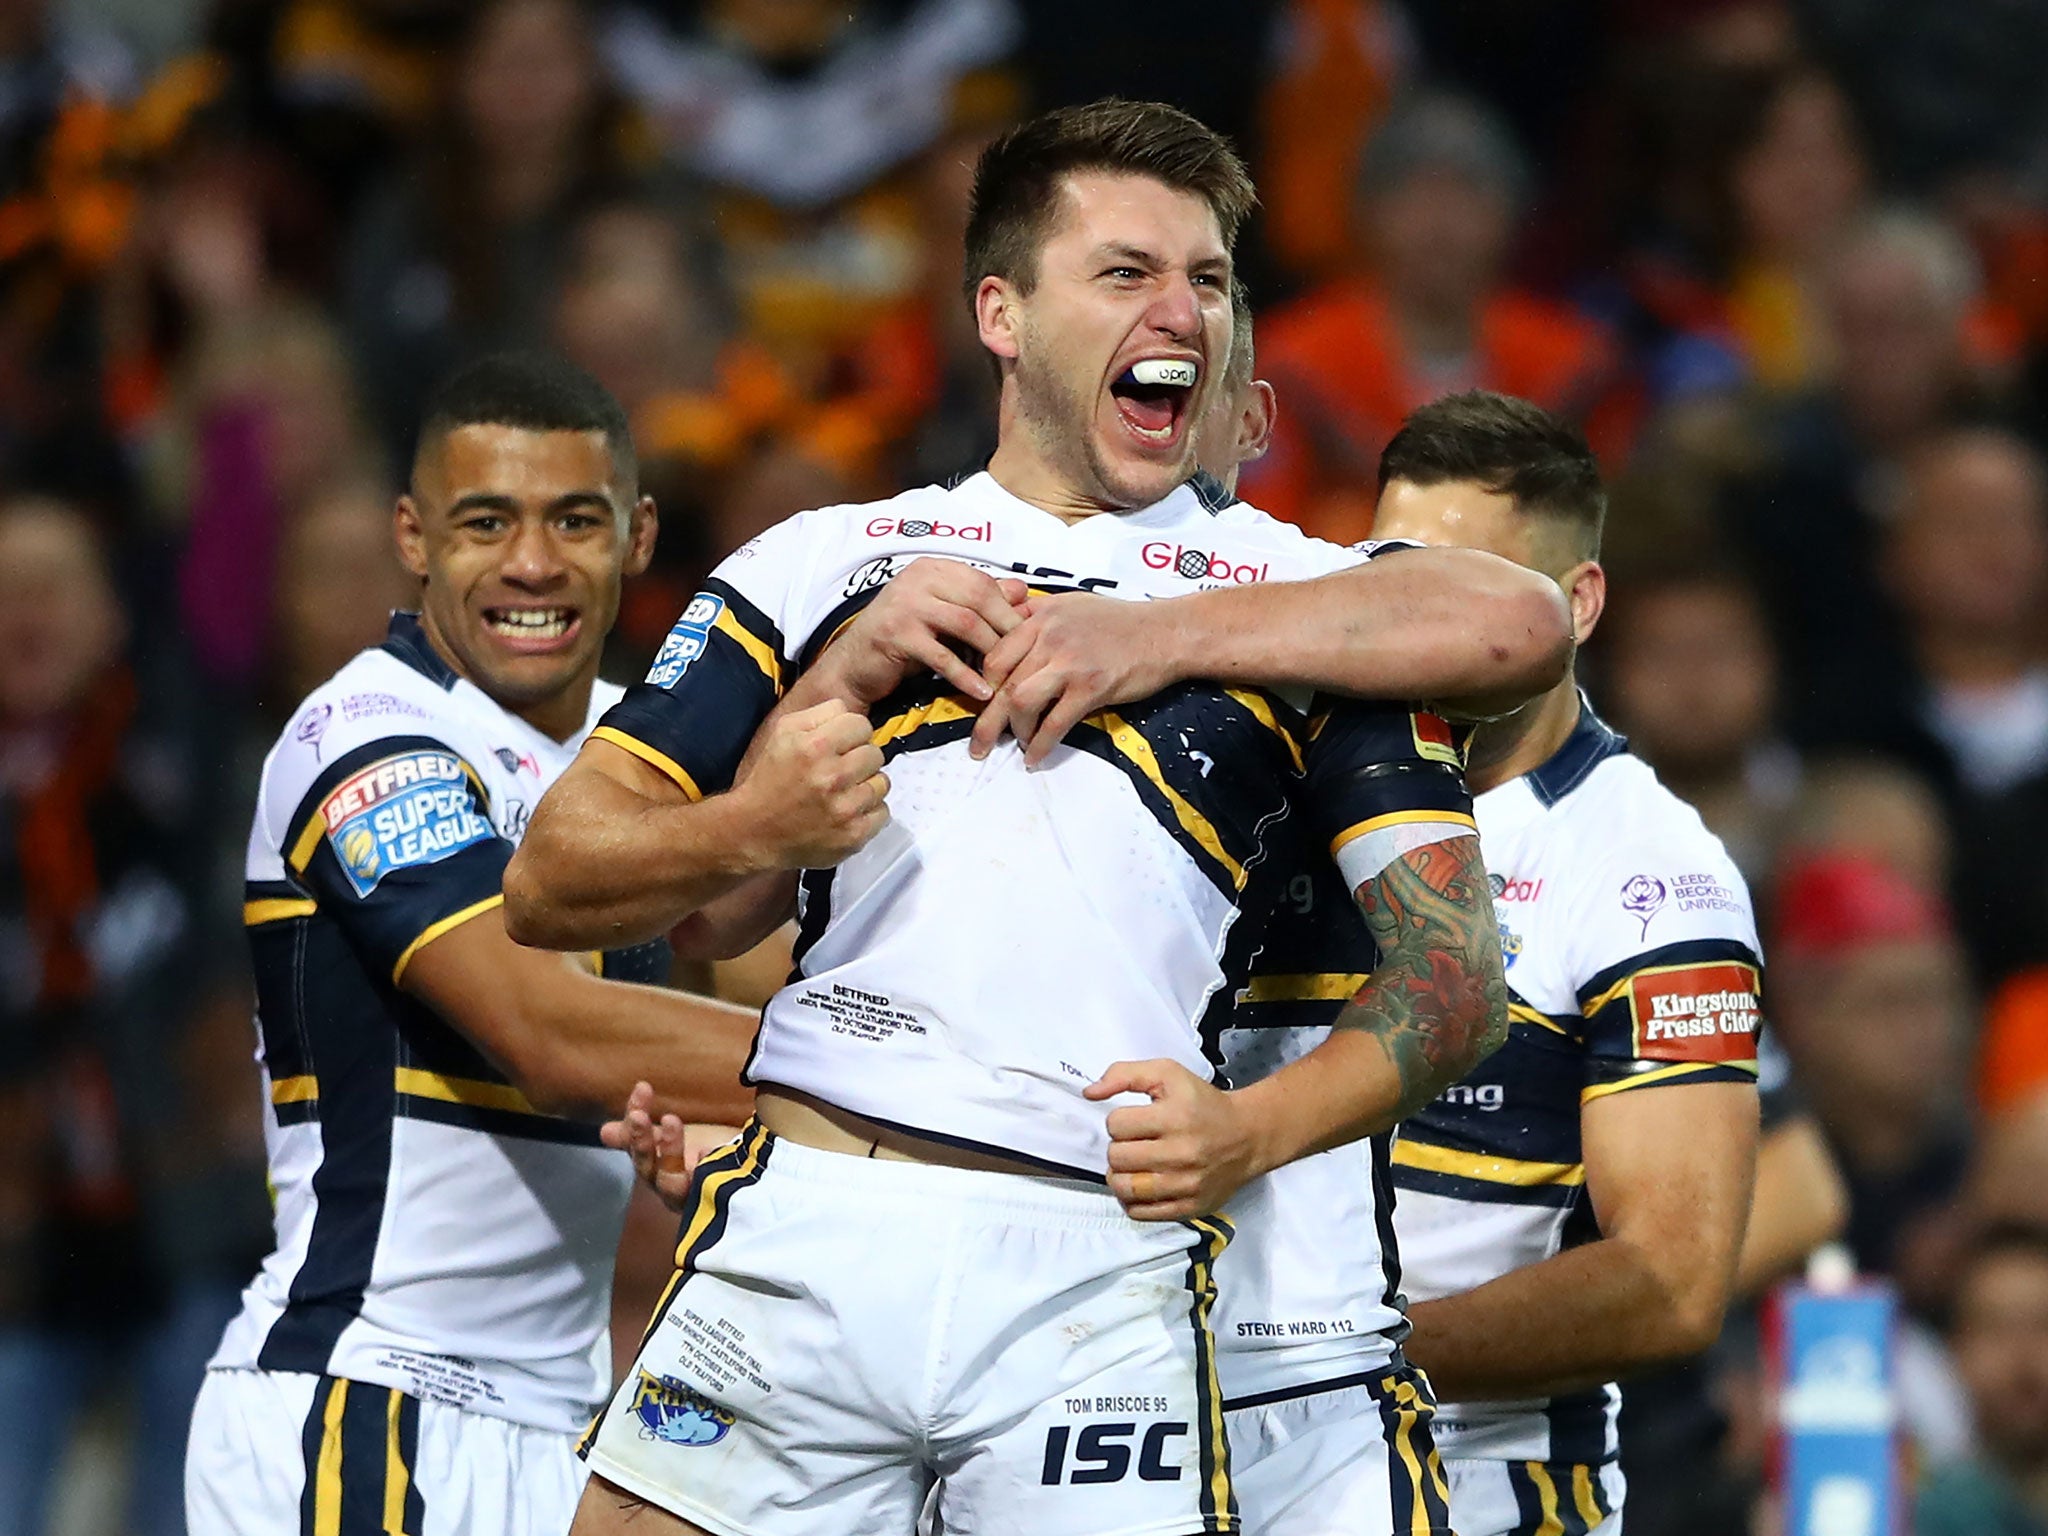 Leeds stormed to victory in last month's Super League Grand Final